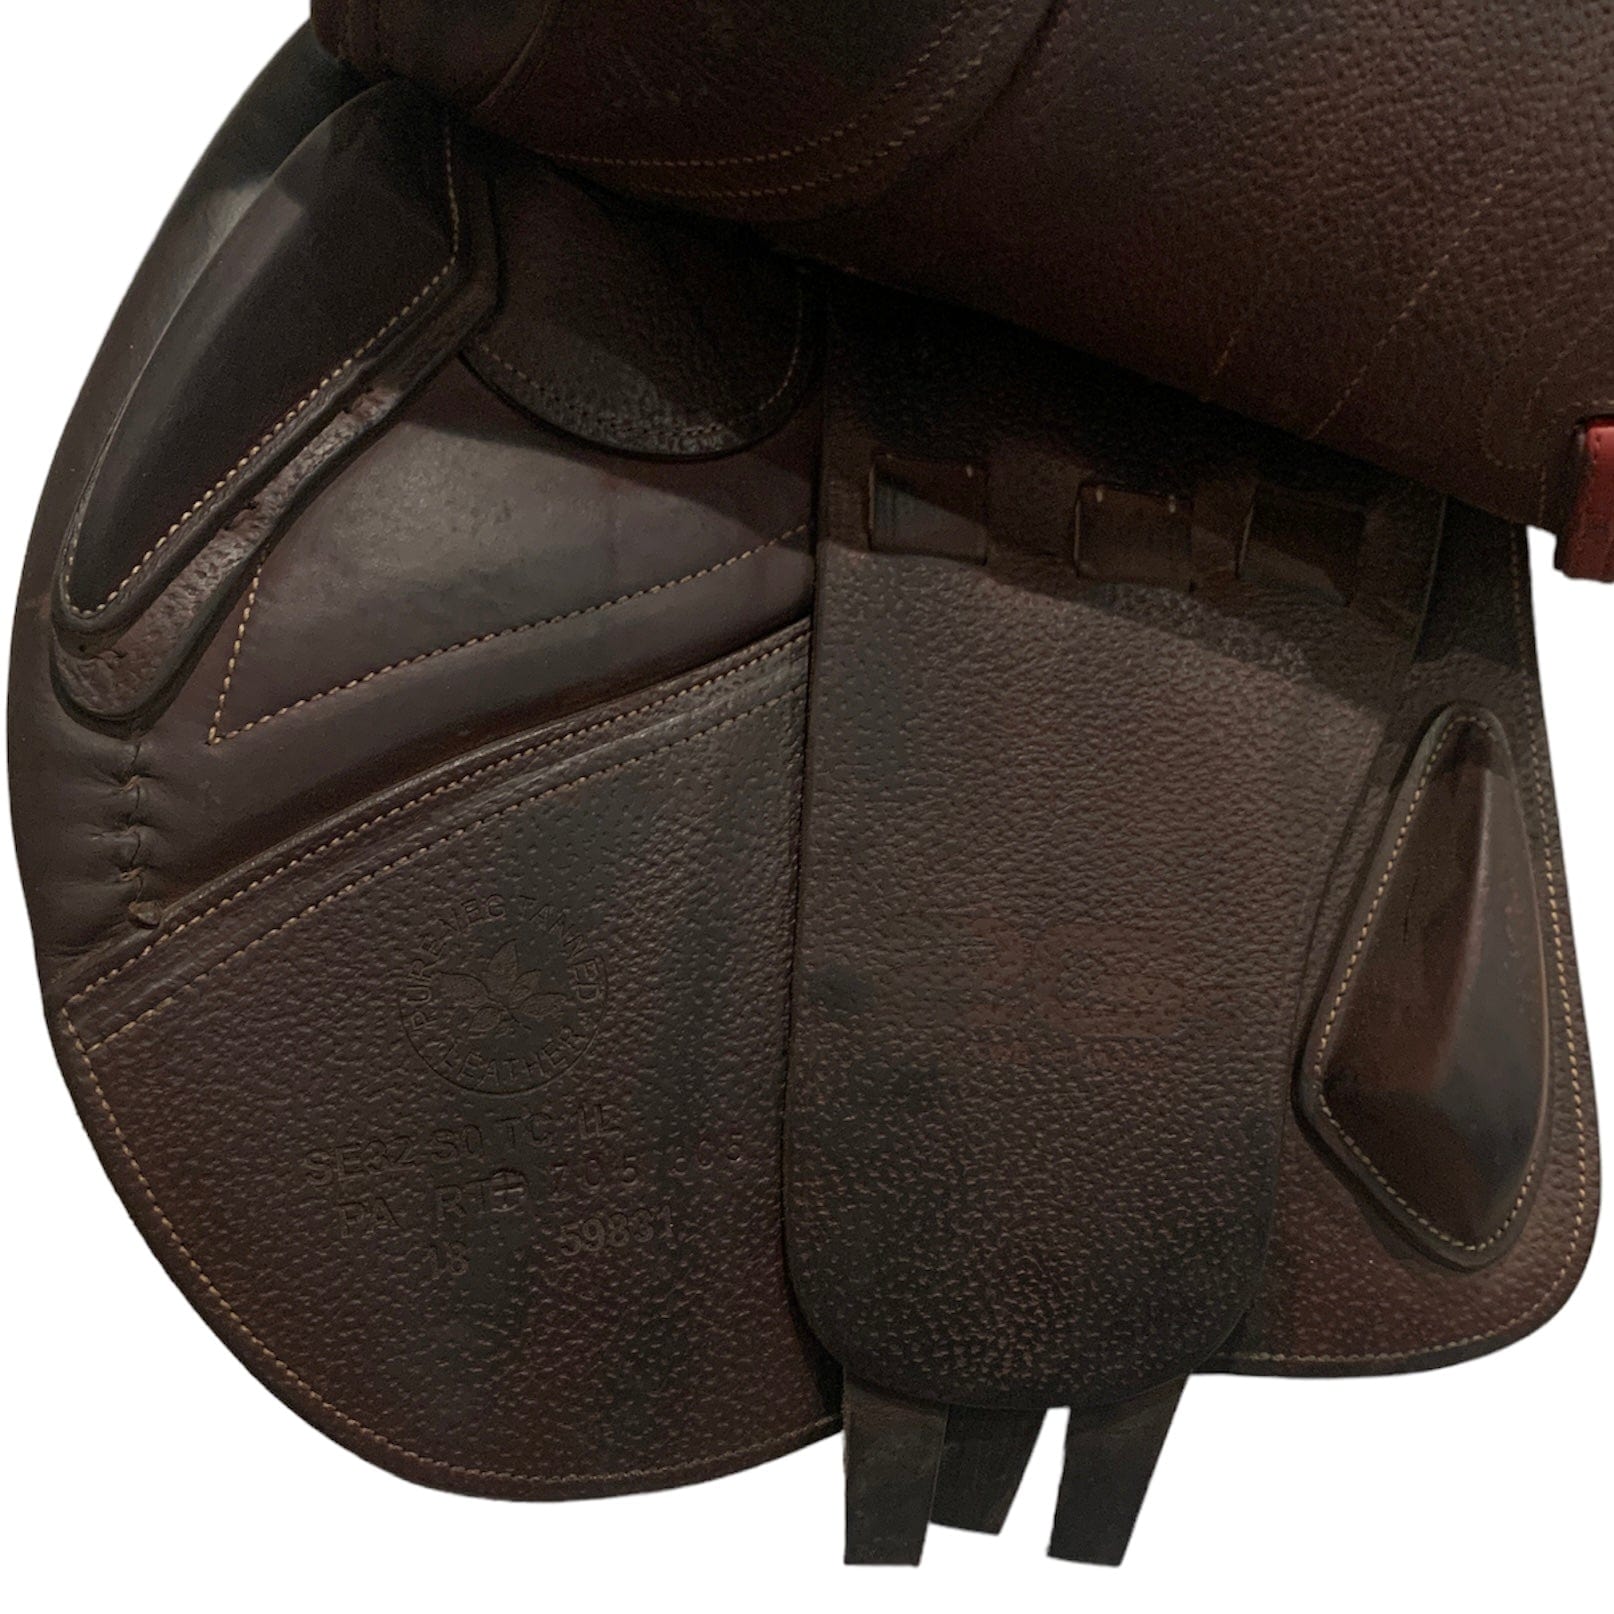 Brown saddle against a white background